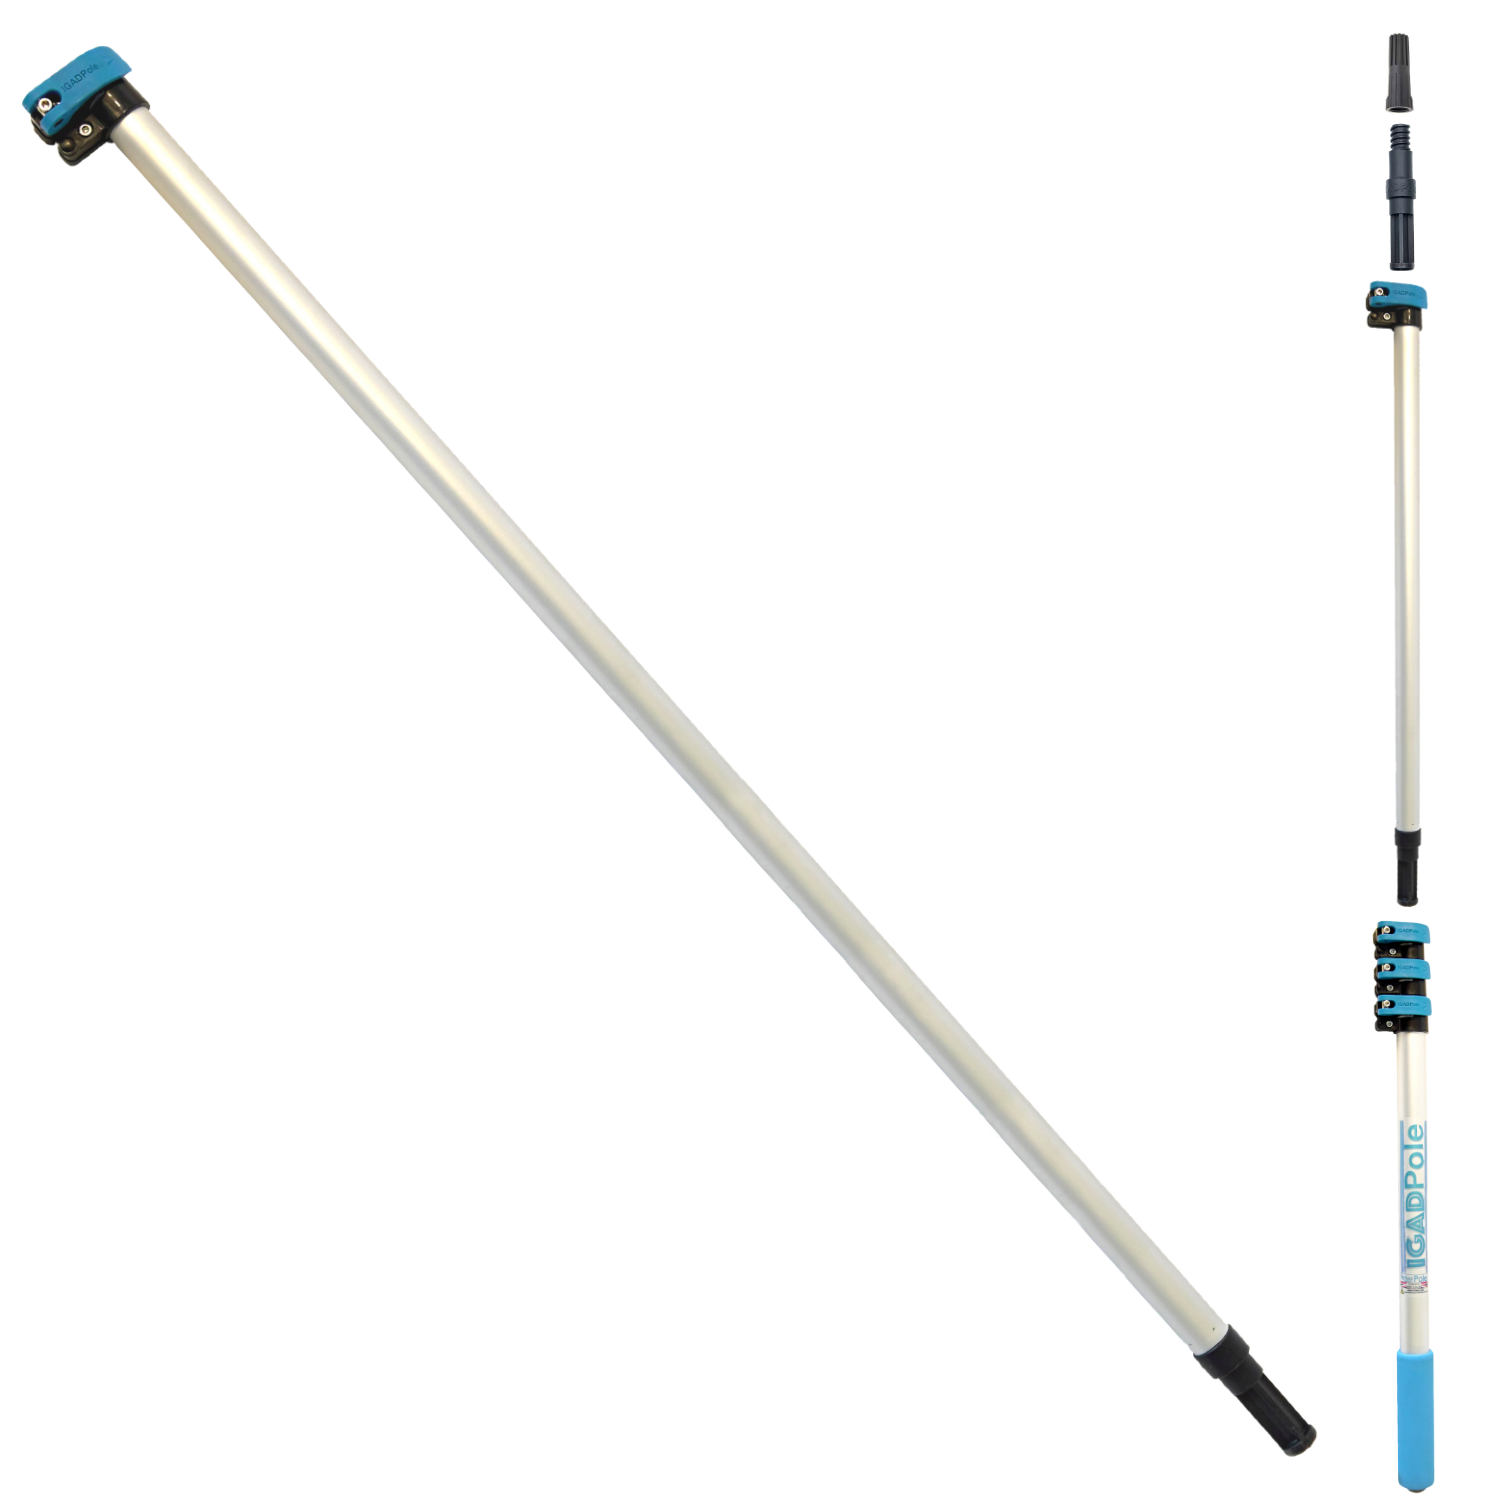 IGADPole Telescopic Pole with Threaded Connector, Use with adaptors like:  Paint Roller, Dusters, Squeegees, Gutter Cleaning